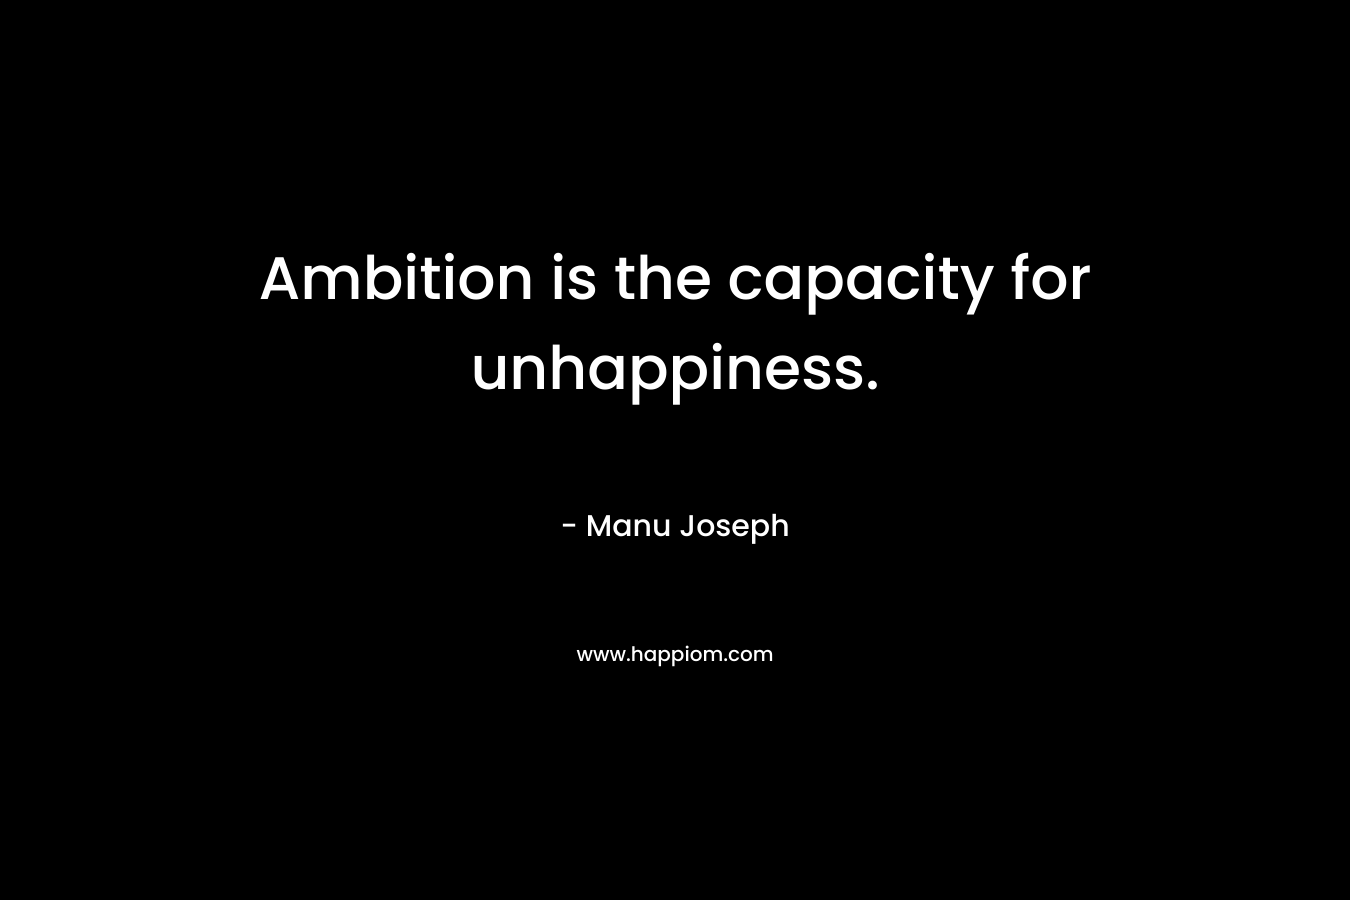 Ambition is the capacity for unhappiness. – Manu Joseph